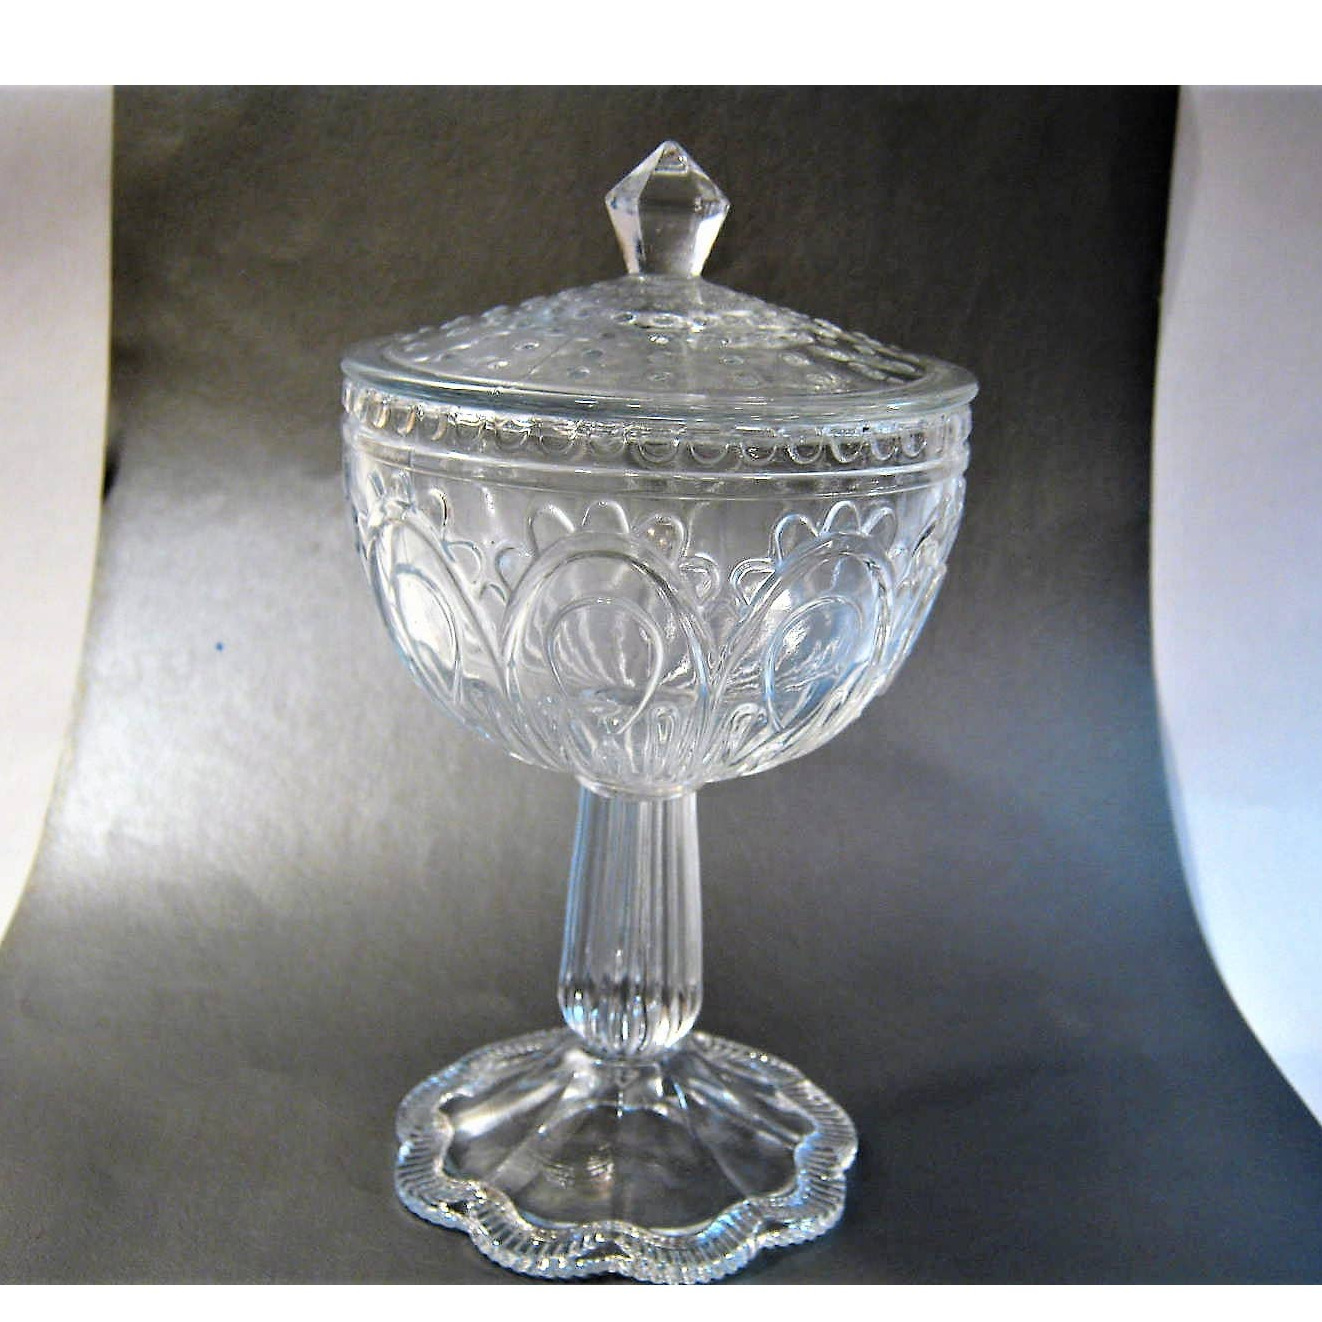 Older Vintage Pressed Glass Candy Nut Dish on Pedestal with Lid-6.5  inch tall 